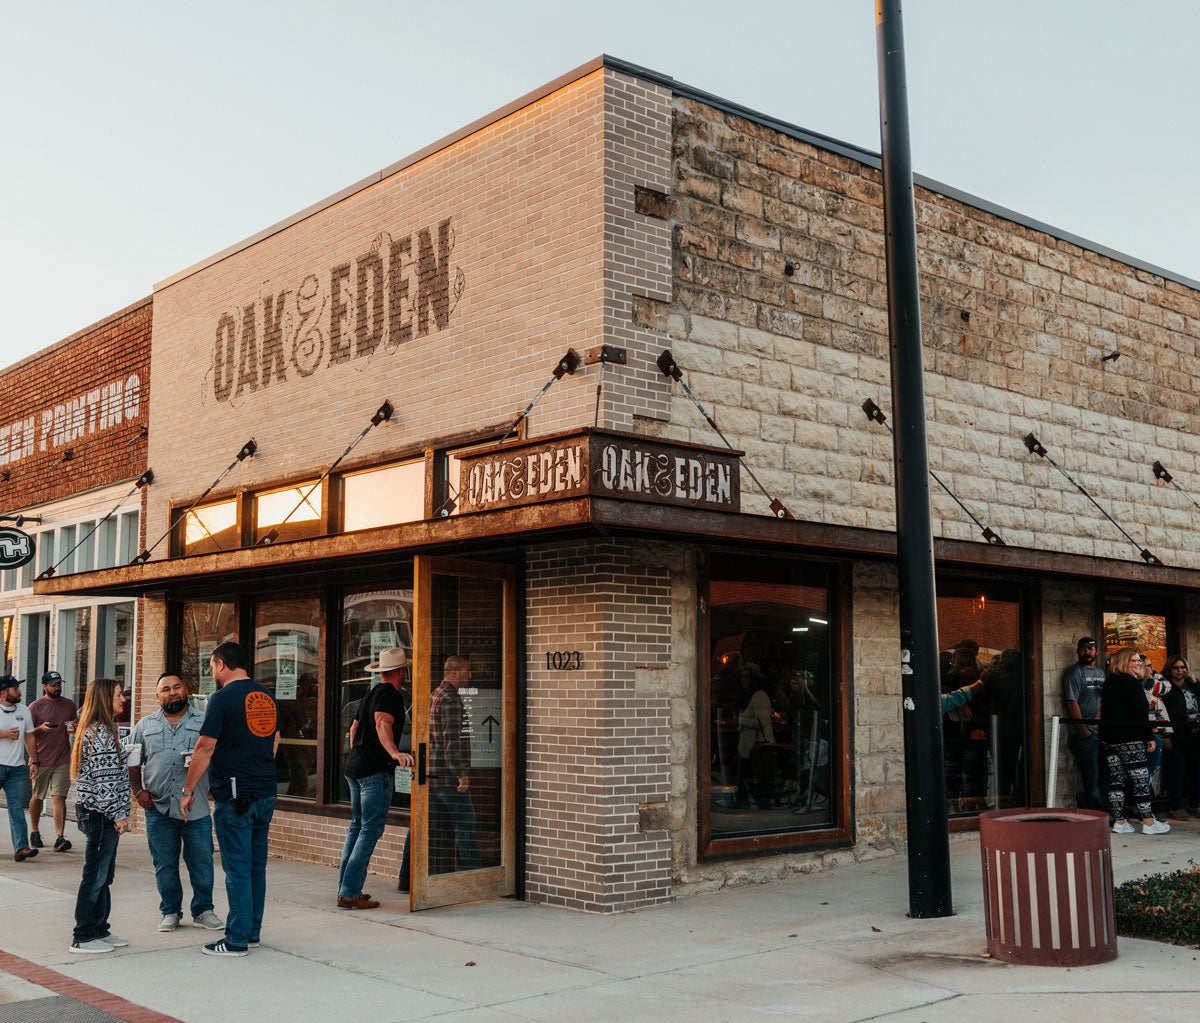 A corner view of a brick building with people walking into it at sunset. The Oak & Eden flagship store sign is visible from the corner of the building and from the front of the building.